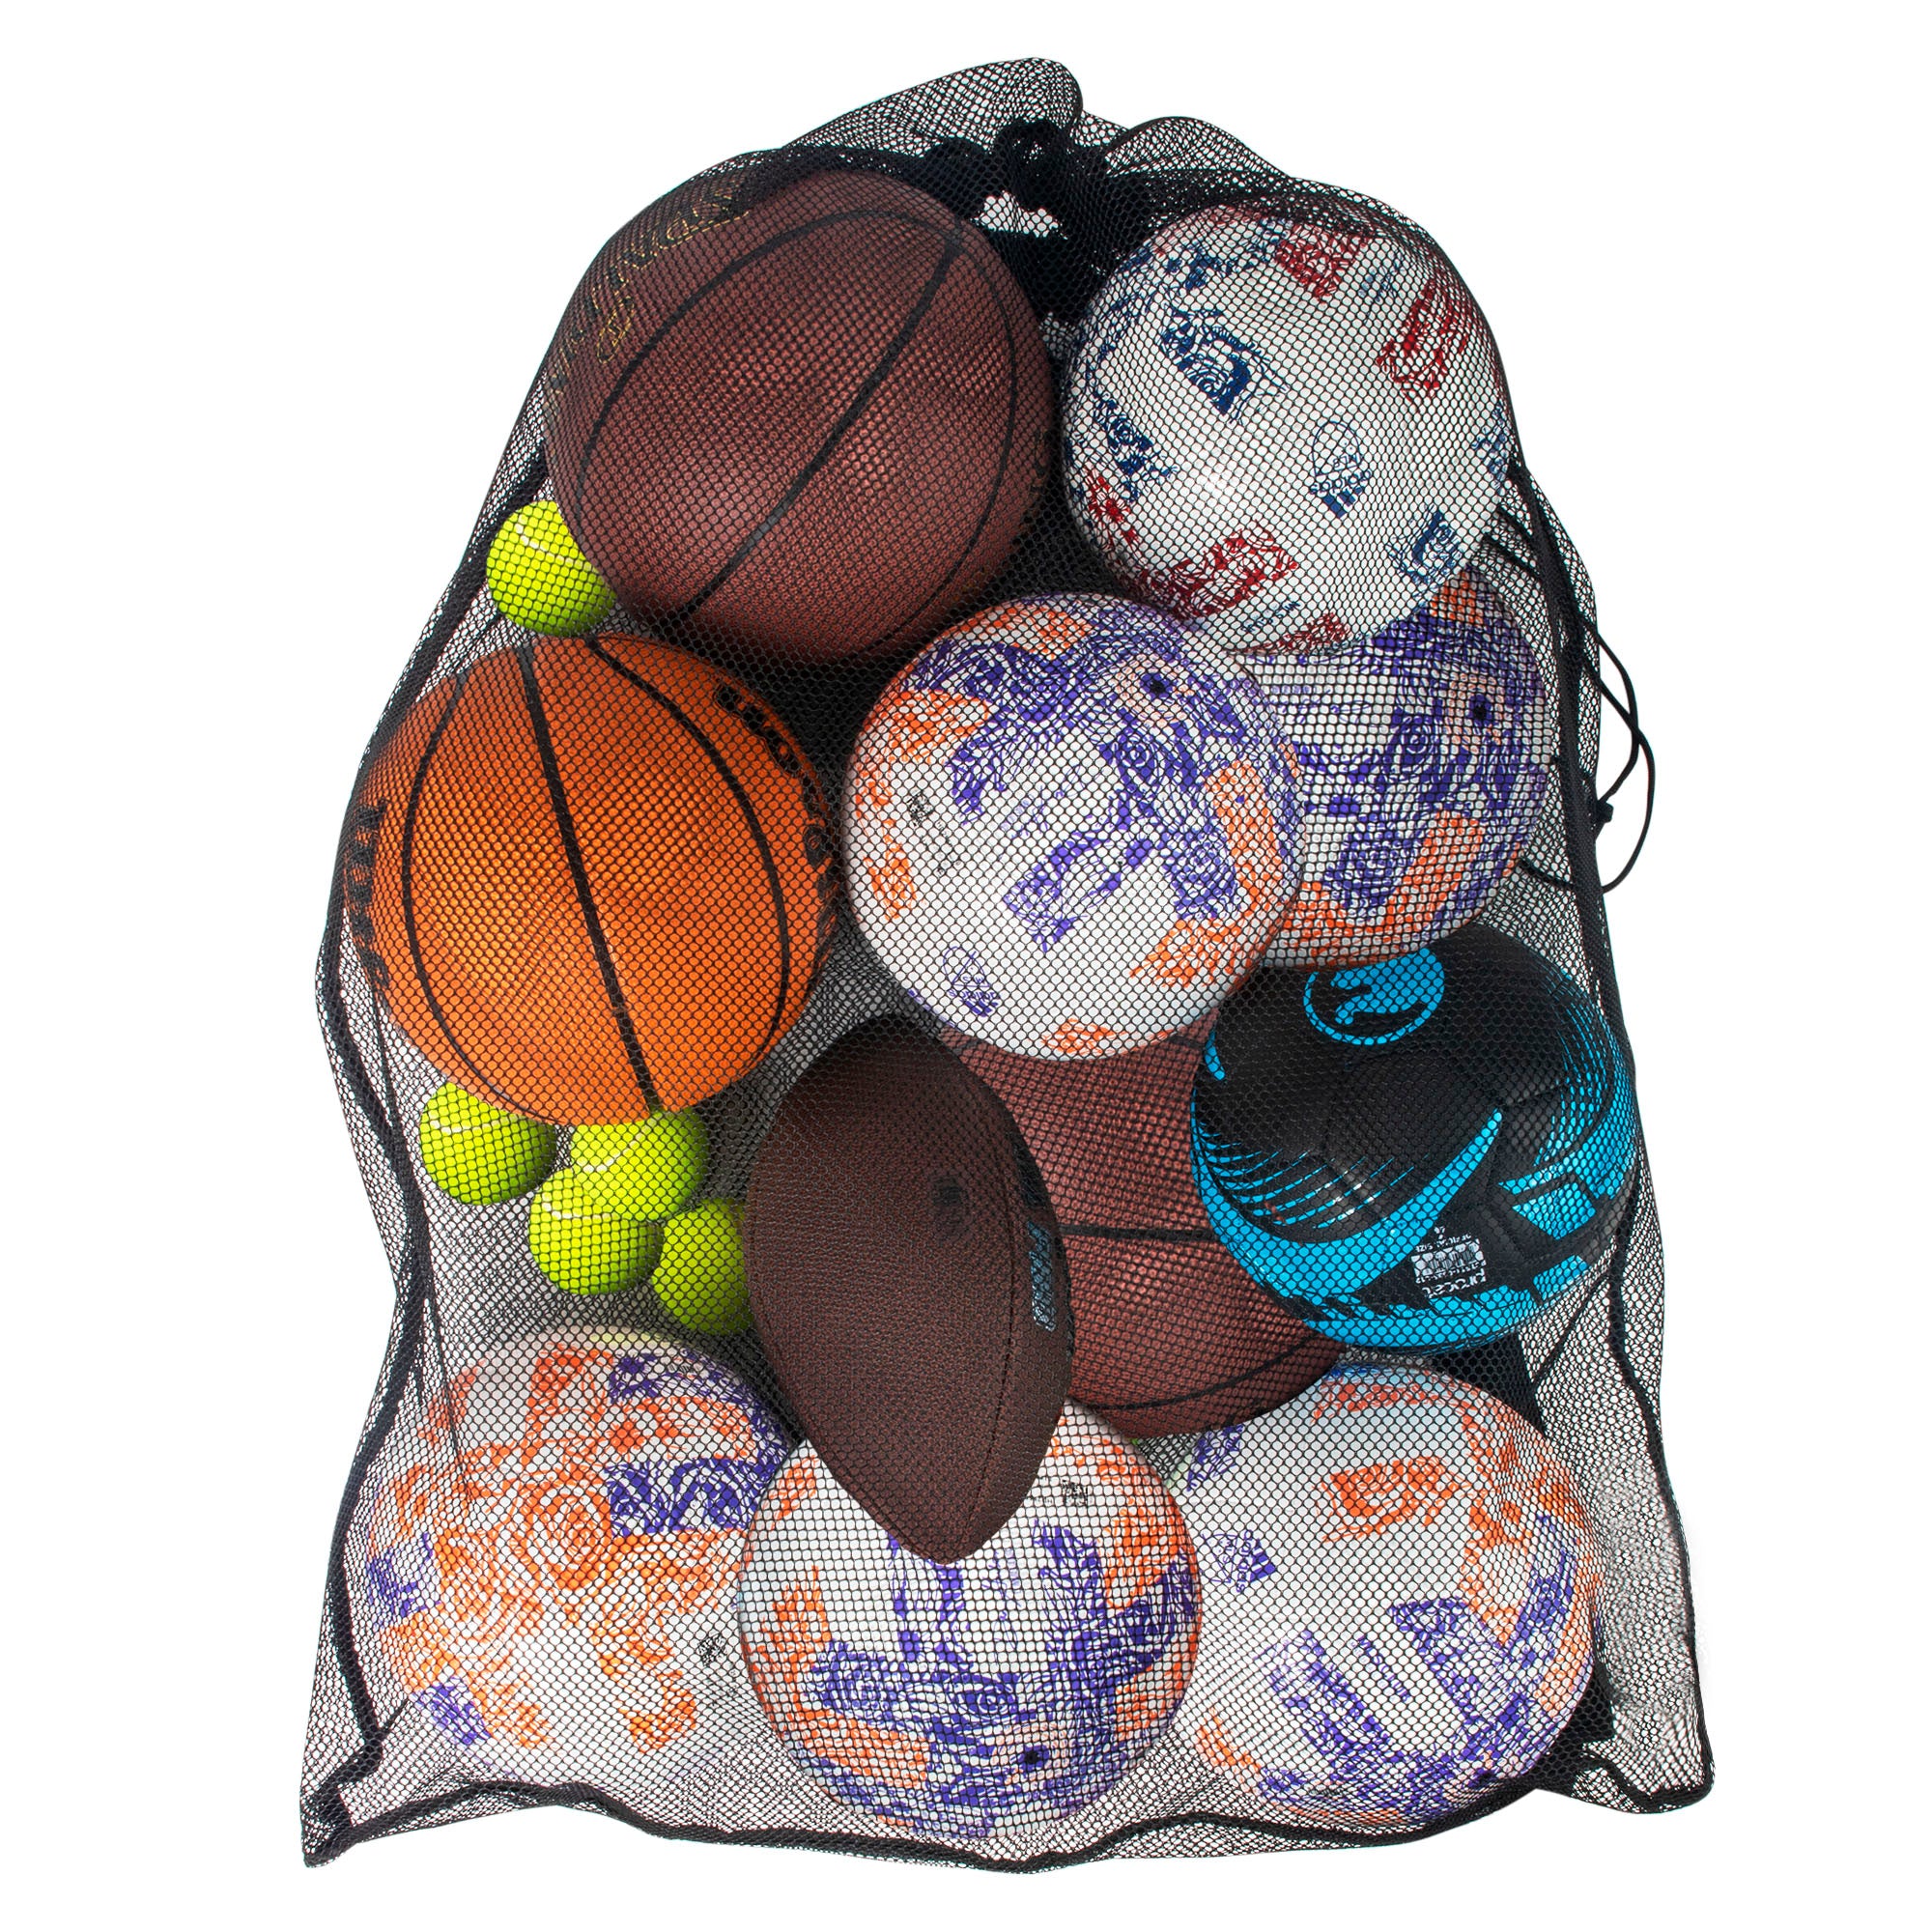 Wholesale 2XL Mesh Laundry & Sports Bag 40 x 30 Inches